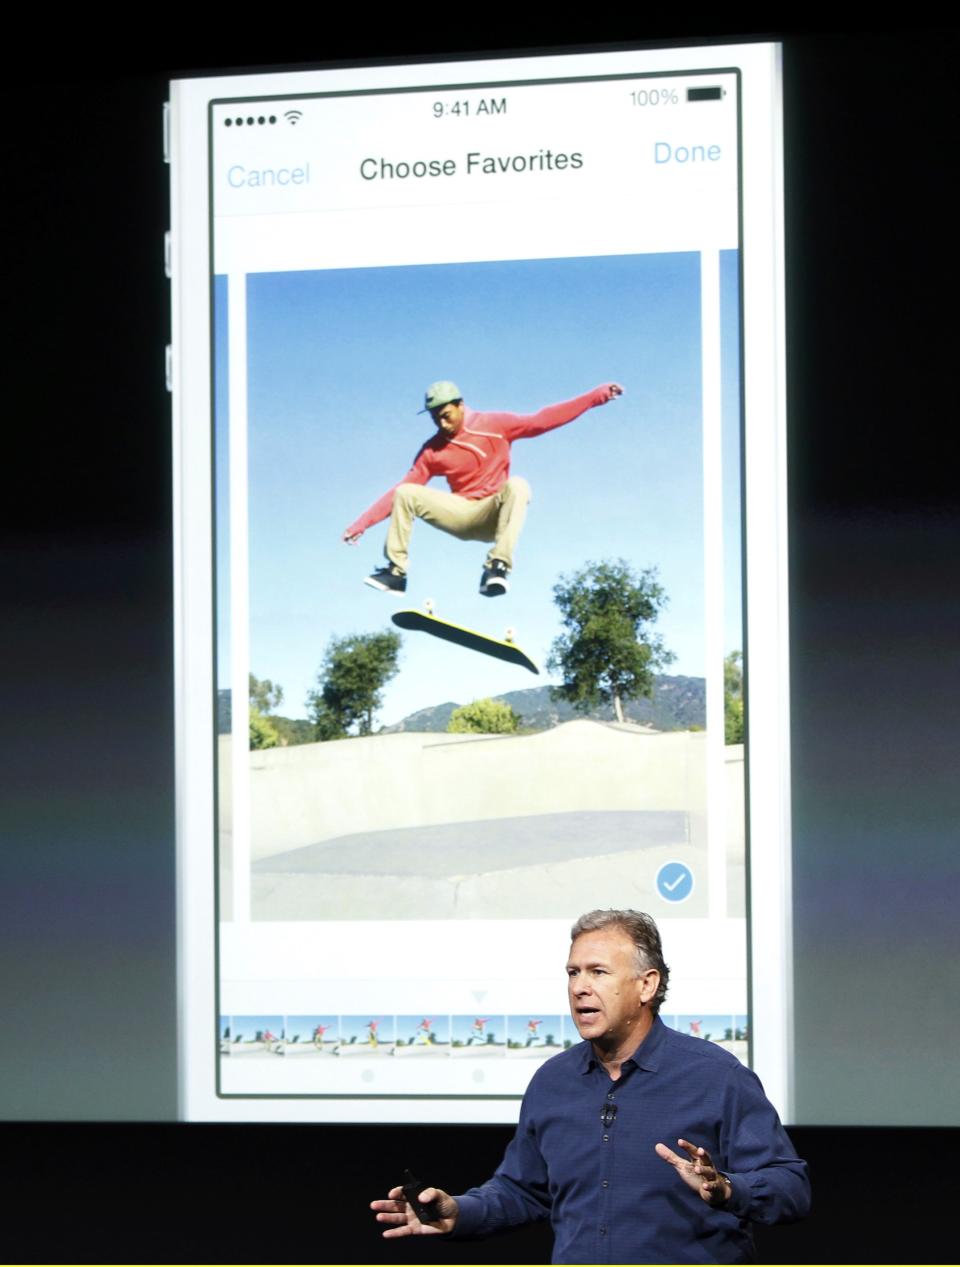 Phil Schiller, senior vice president of worldwide marketing for Apple Inc, talks about the new iPhone 5S camera at Apple Inc's media event in Cupertino